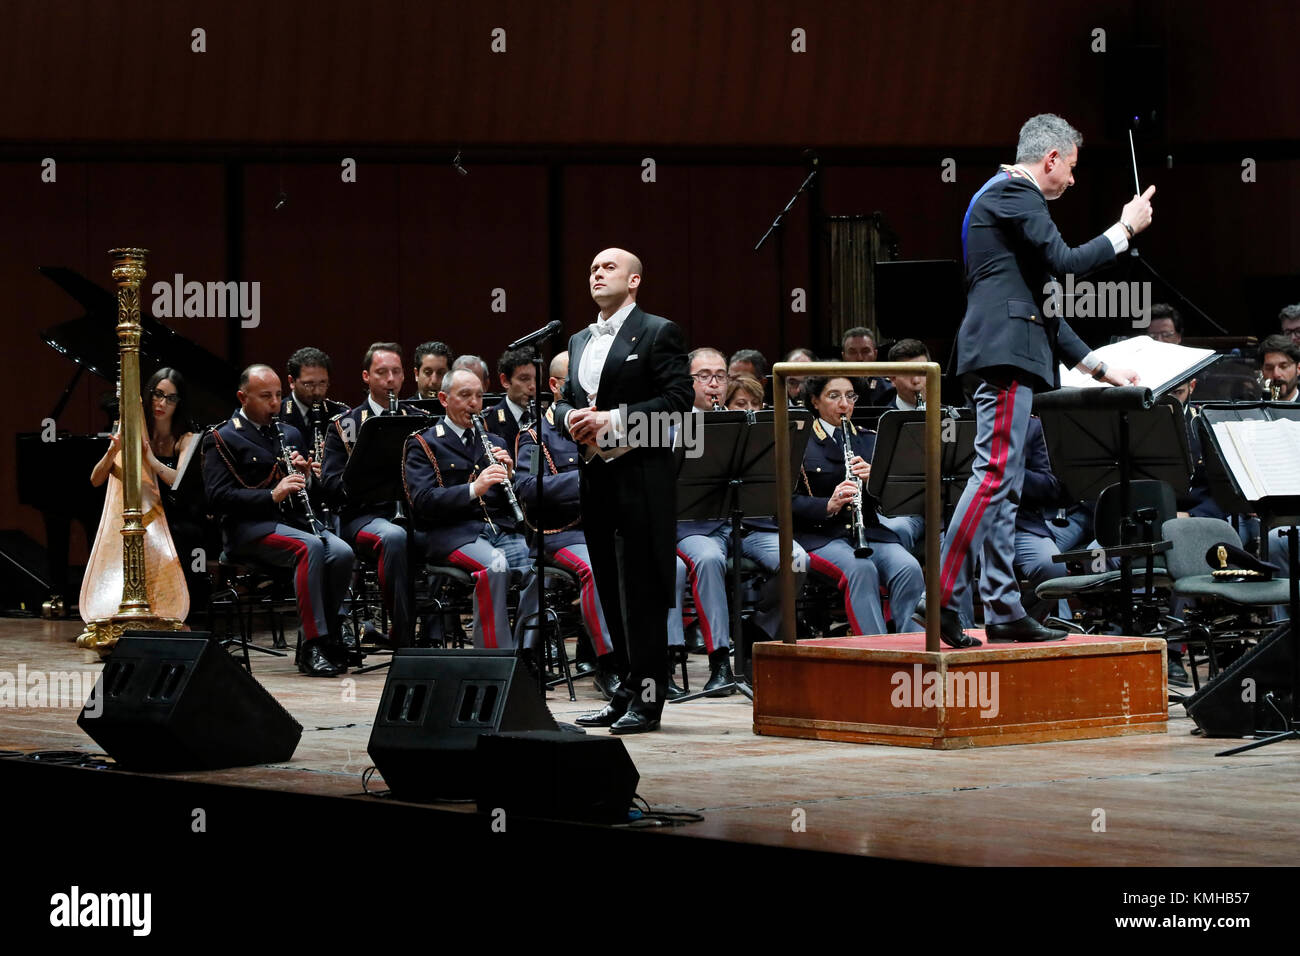 Rome, Italy - 11 December 2017: the tenor Aldo Caputo performs on the stage of the Auditorium Parco della Musica, on the occasion of the concert of the National Police Band, 'Be there always, with music and words'. Stock Photo